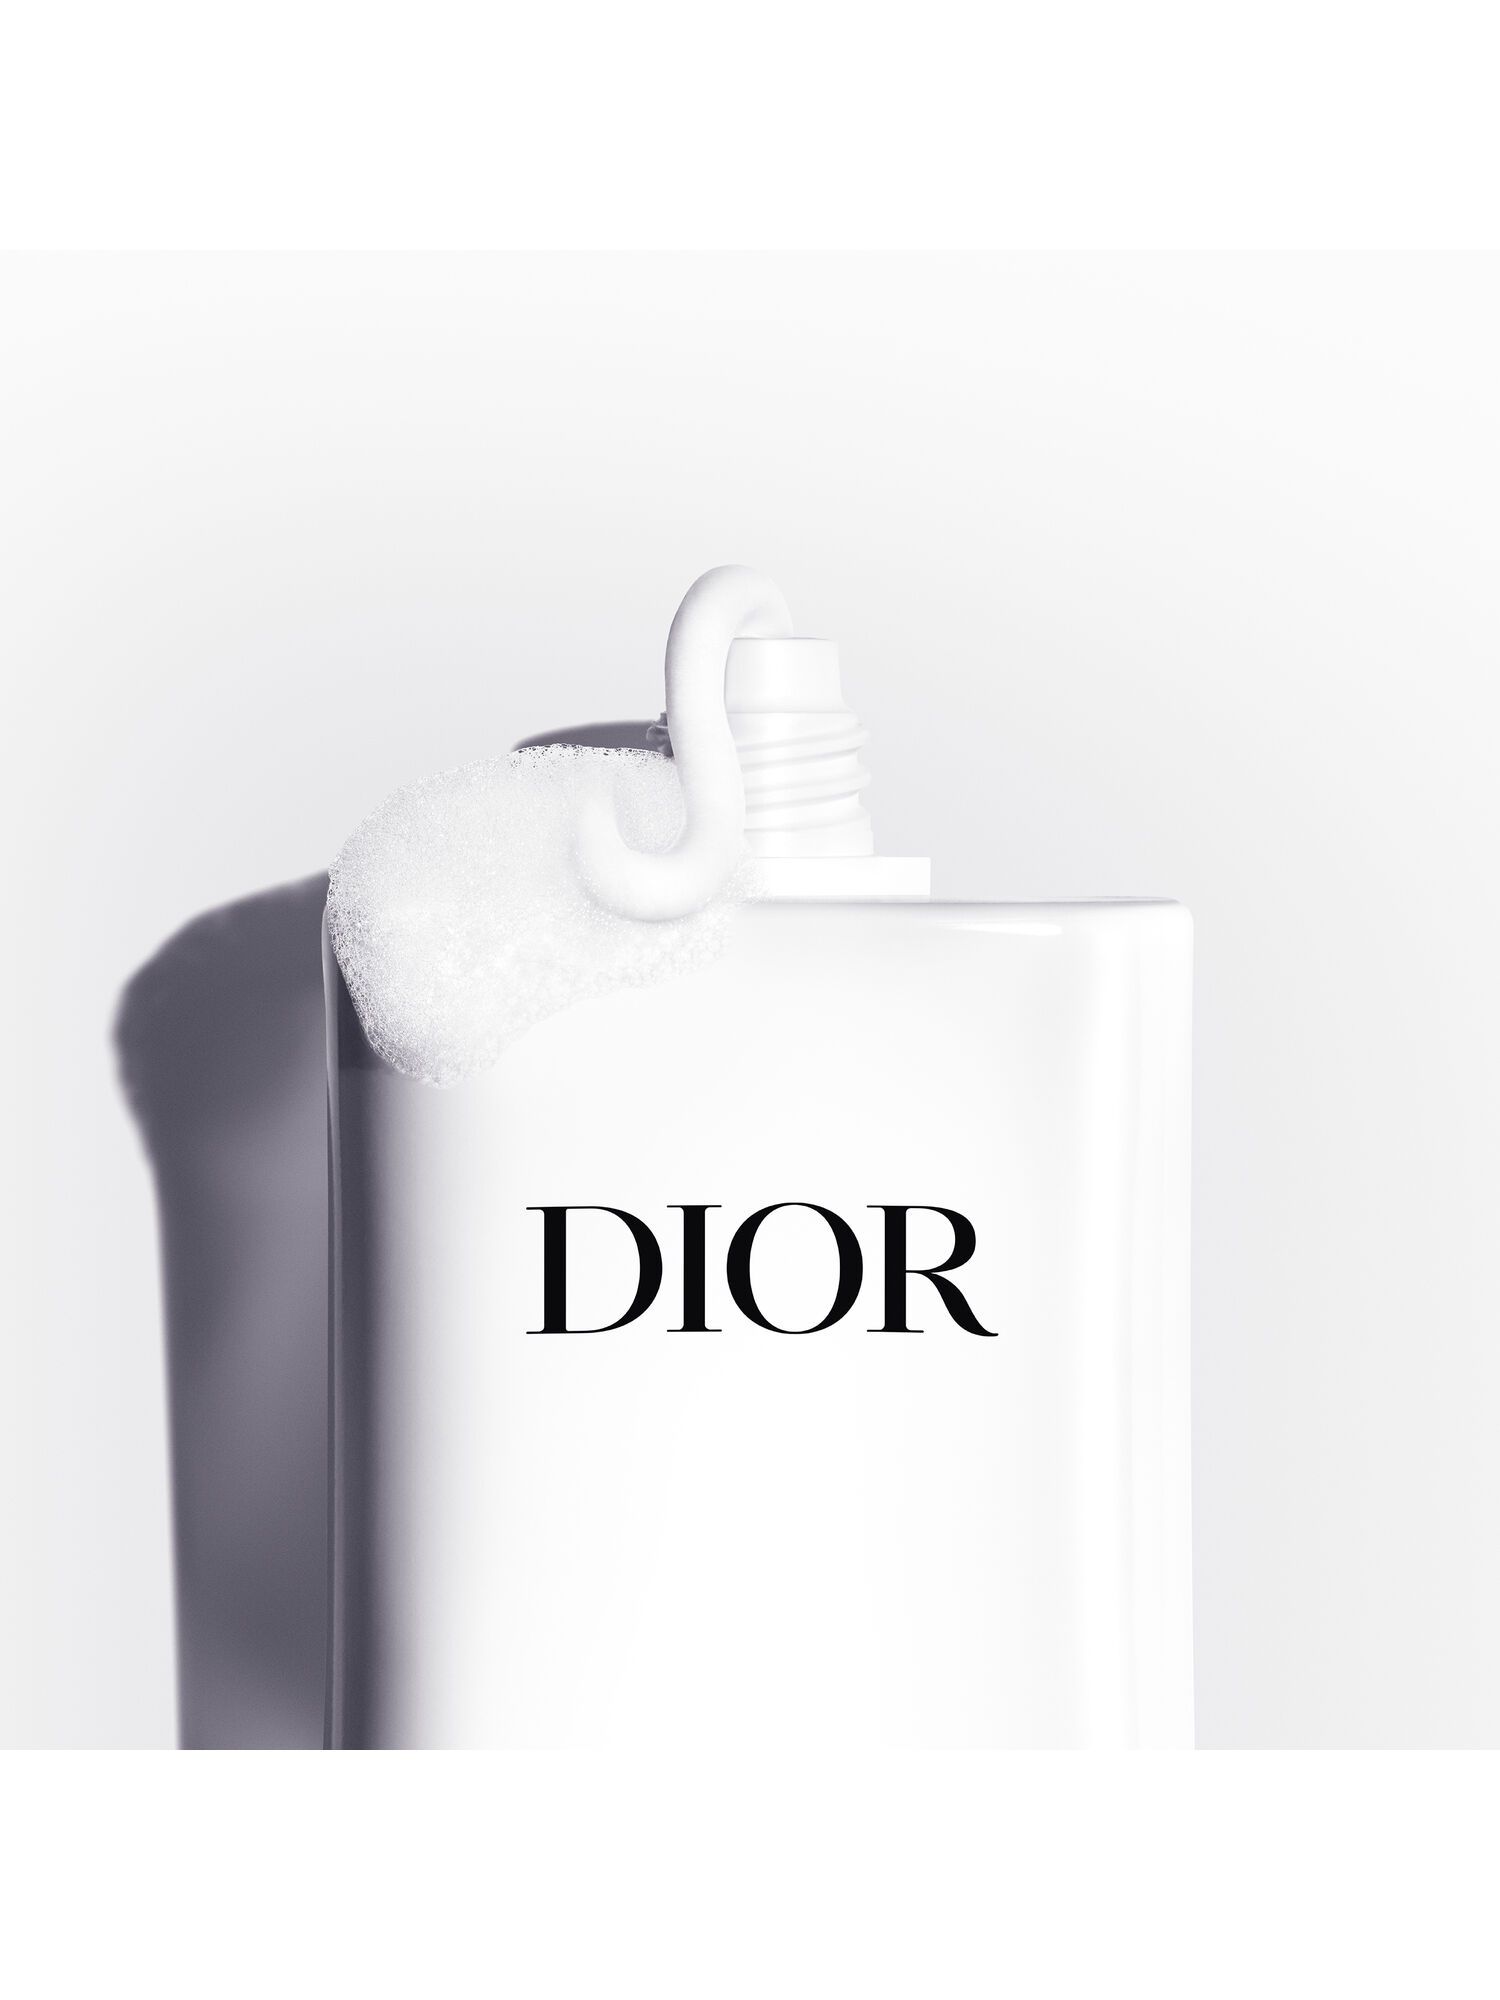 DIOR La Mousse OFF/ON Foaming Cleanser, 150ml 5